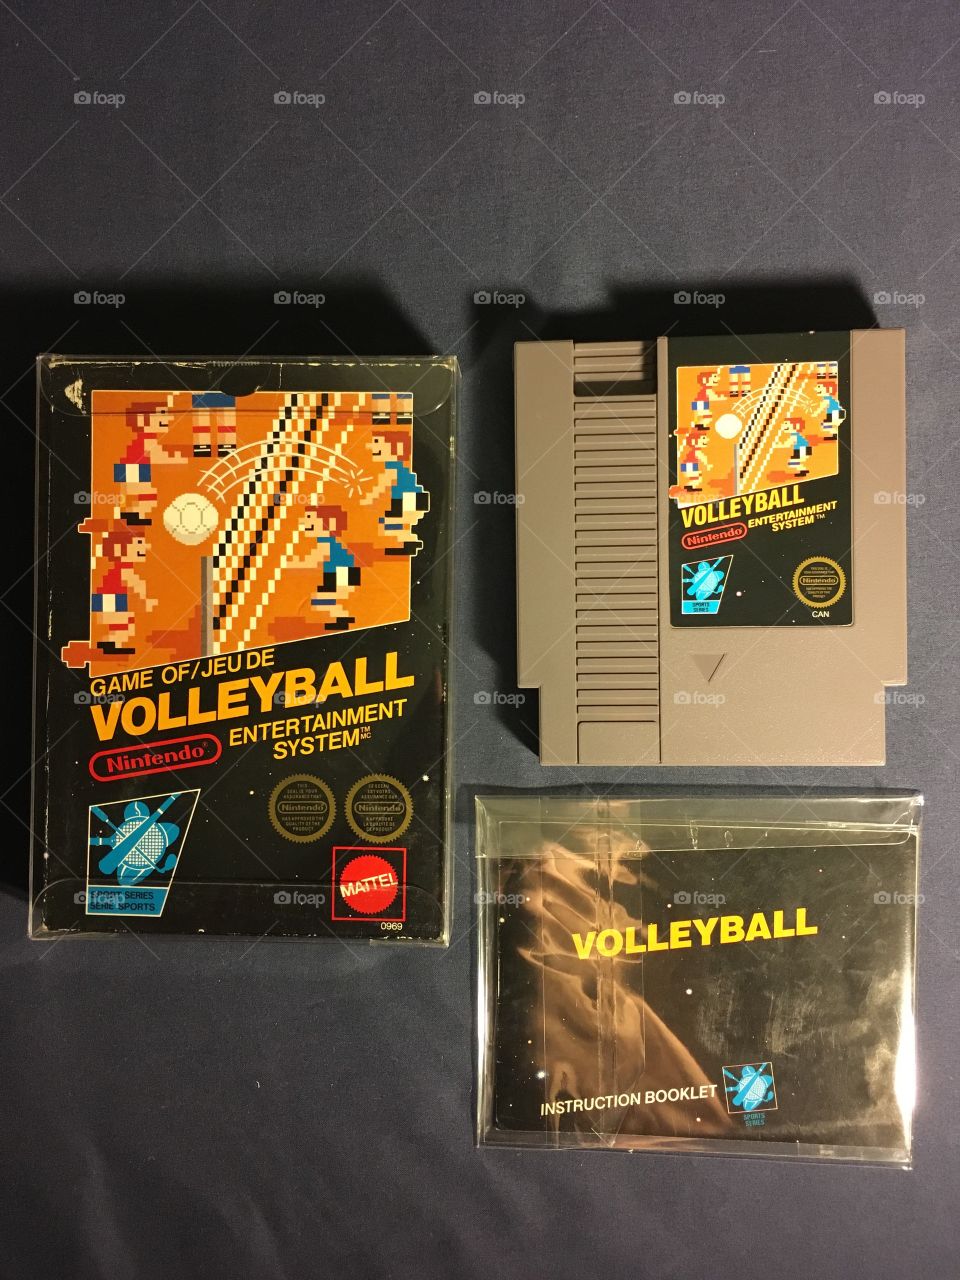 Volleyball video game for the Nintendo NES
Released - 1987